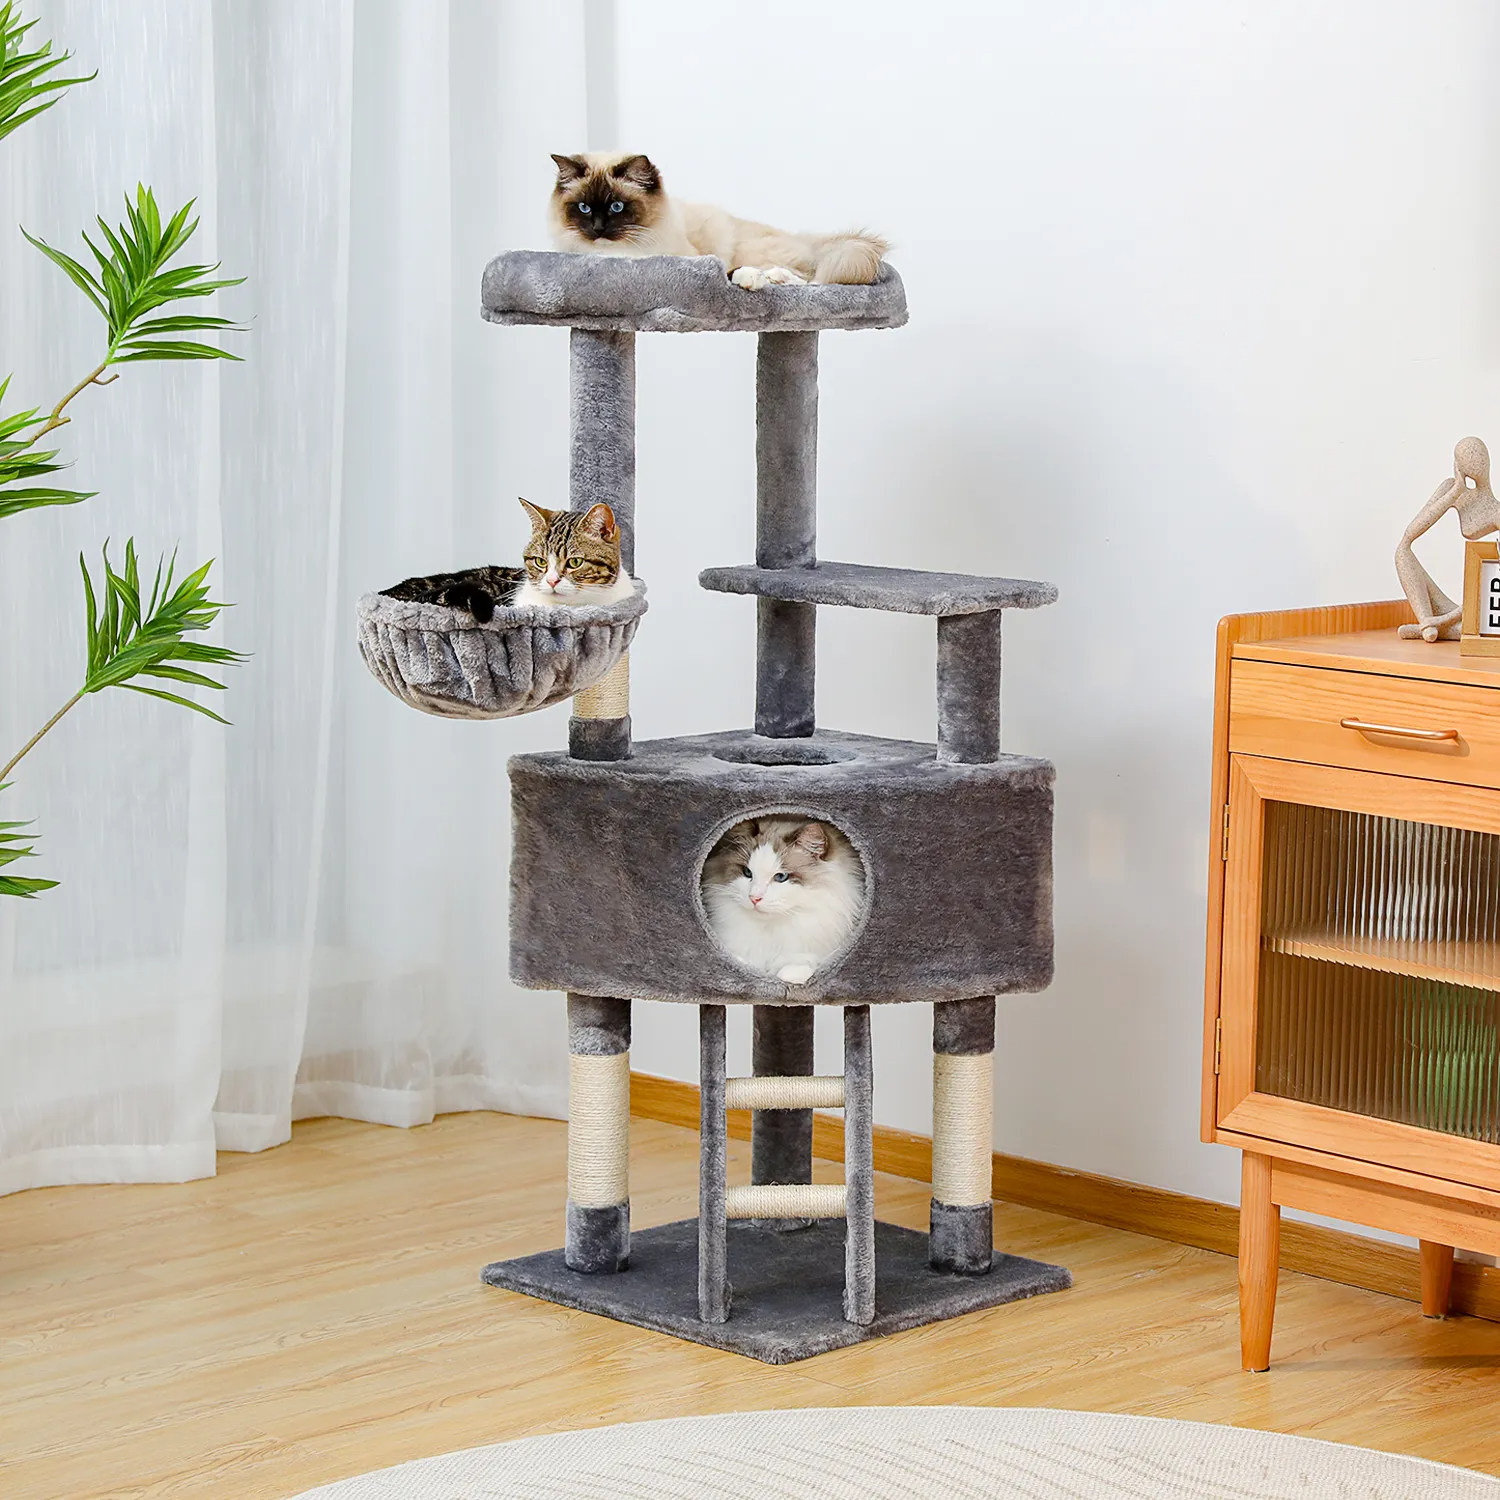 H120CM Cat Tree Condo for Indoor Self Grooming Brush Sisal Scratching Post Soft Perch House and Hanging Ball Toy Cozy Hummock